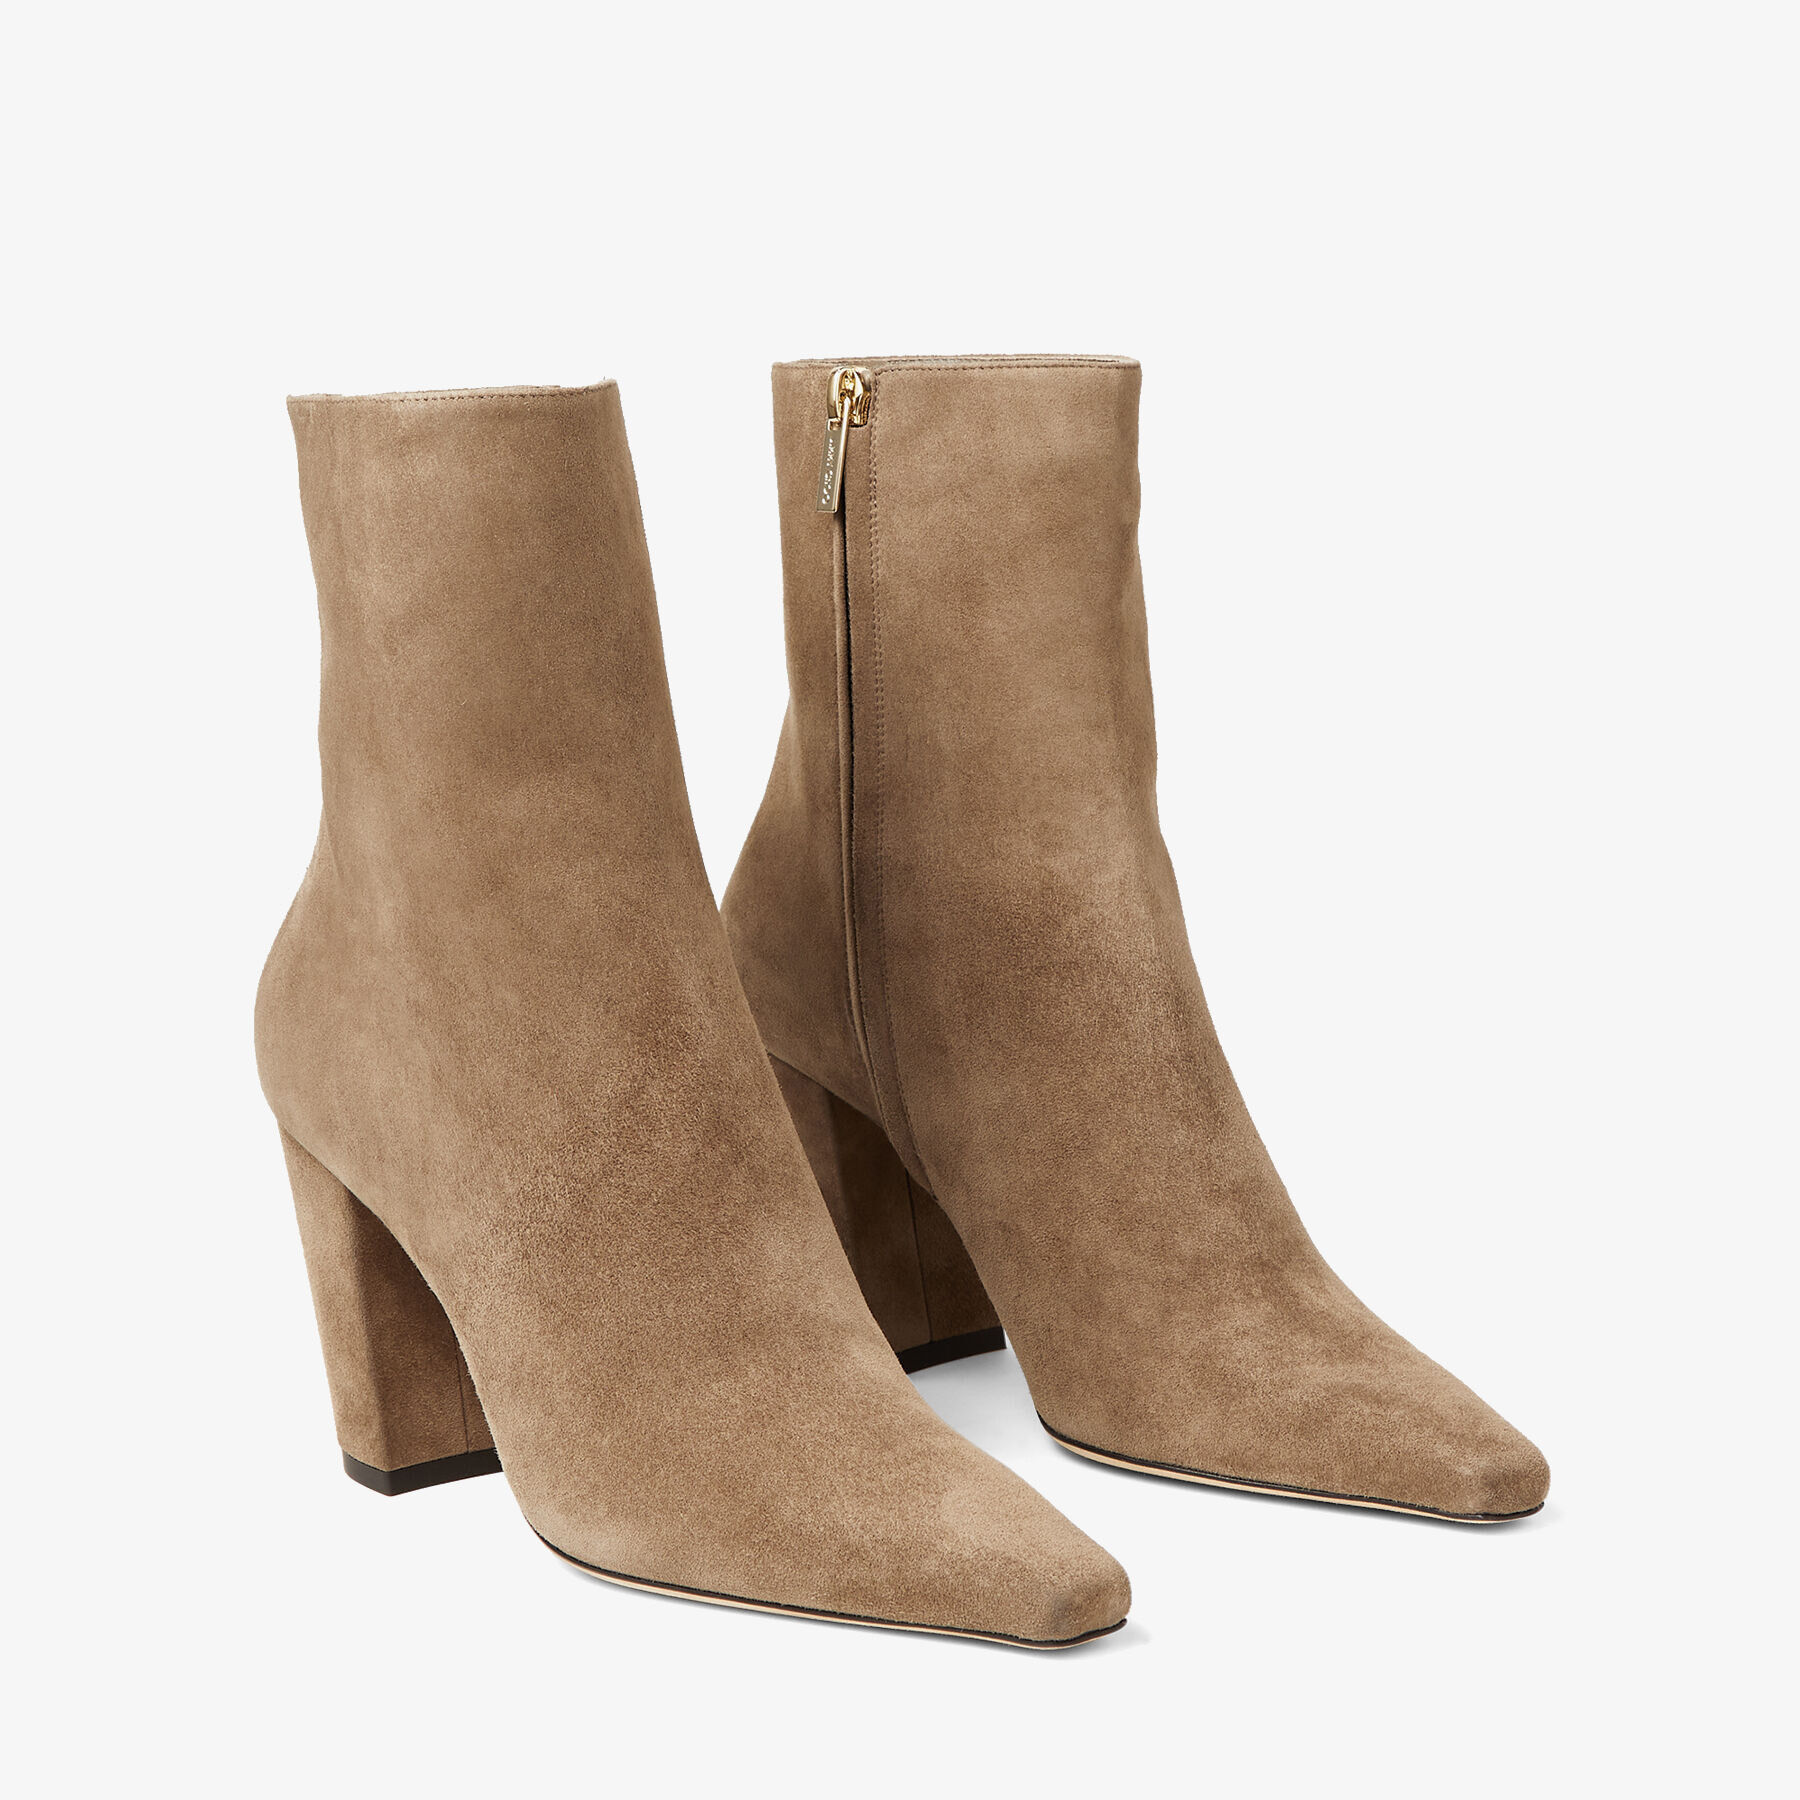 Clay Suede Ankle Boots | ZADIE 85 | Autumn Winter 2021 | JIMMY CHOO